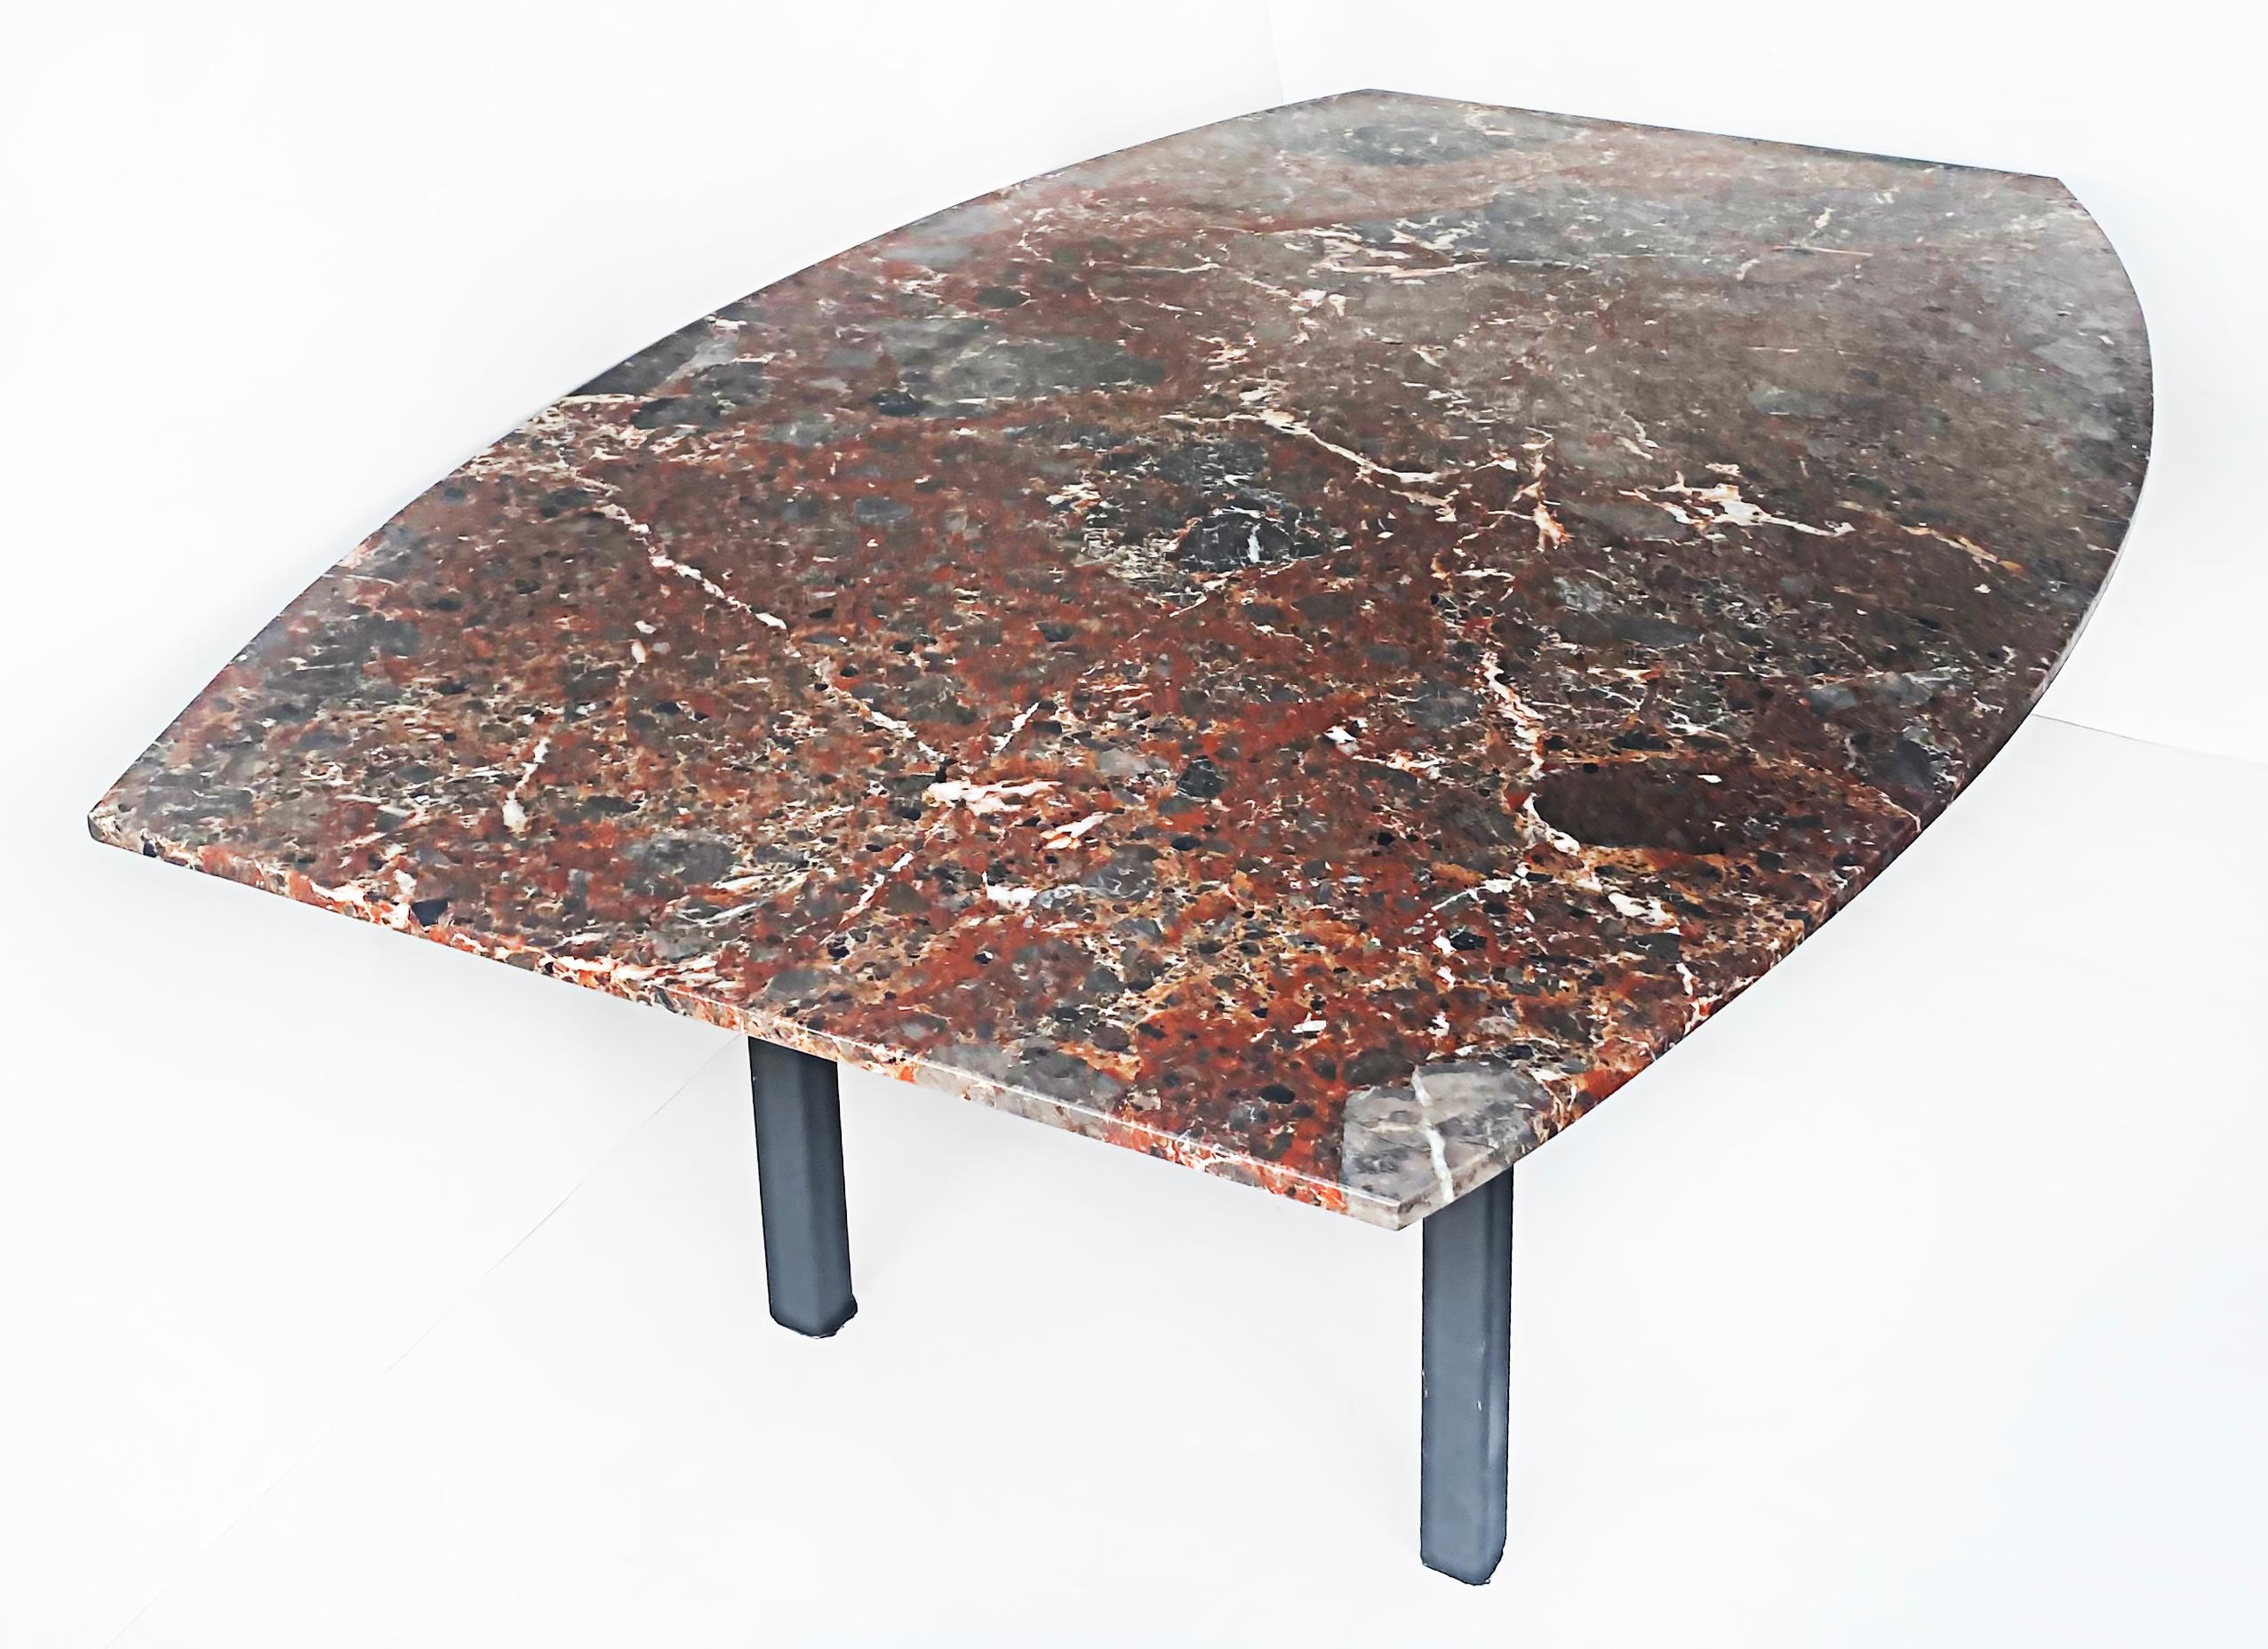 Variegated marble dining table with painted steel legs and stretchers

Offered for sale is a variegated marble dining table with black painted square steel legs joined by stretchers. This beautifully grained marble has varying tones of grays,